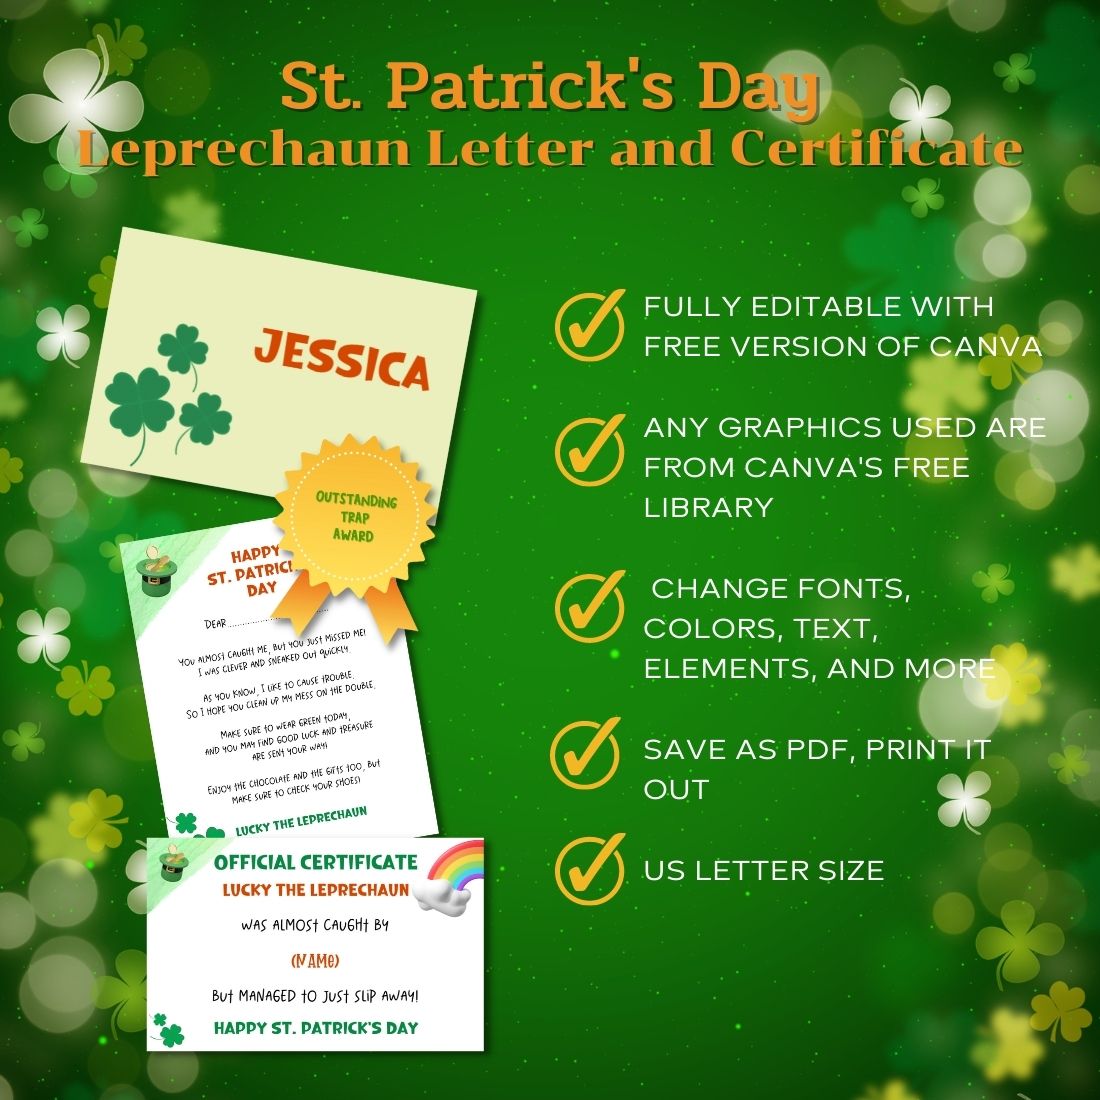 St patrick's day letter and certificate.